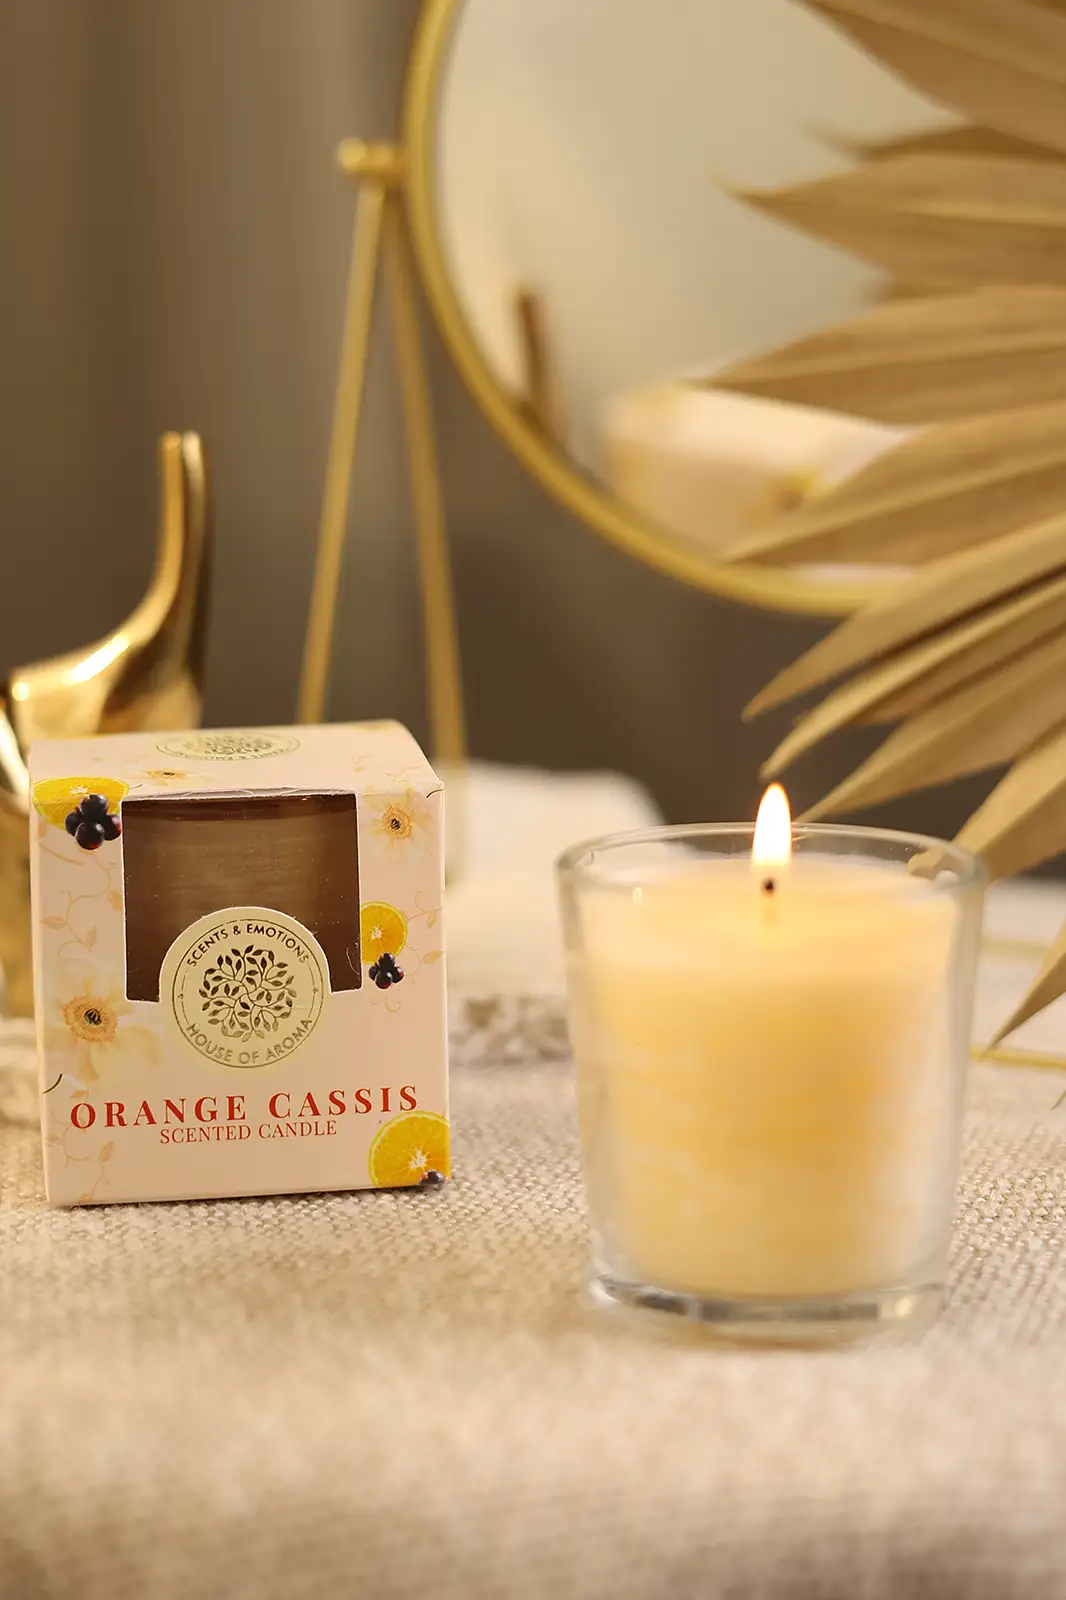 orange candle, orange glass candle, orange scented candle, scented candles near me, best scented candles India, best orange scented candles, House of Aroma, scented candles online, home decor scented candles, organic scented candles, online scented candles, home decor candle, buy scented candles online, room decor candles, best scented candles online, organic candles India, aroma candles online India, organic scents for candles, organic soy candles, natural scented beeswax candles, benefits scented candles, aroma candles buy online, scented candles for home decor, best scents of candles, organic natural scented candles, home decor aroma candles, scented candles order online, organic soy candle wax, best home scented candles, best organic scented candles, organic scented oils, best fragrance scented candles, organic aroma for candles, organic soy for candles, aroma scented candles, scented candle brand, aroma diffuser candle, essential oil for scented candles, aroma candles gift set, best aroma candles in India